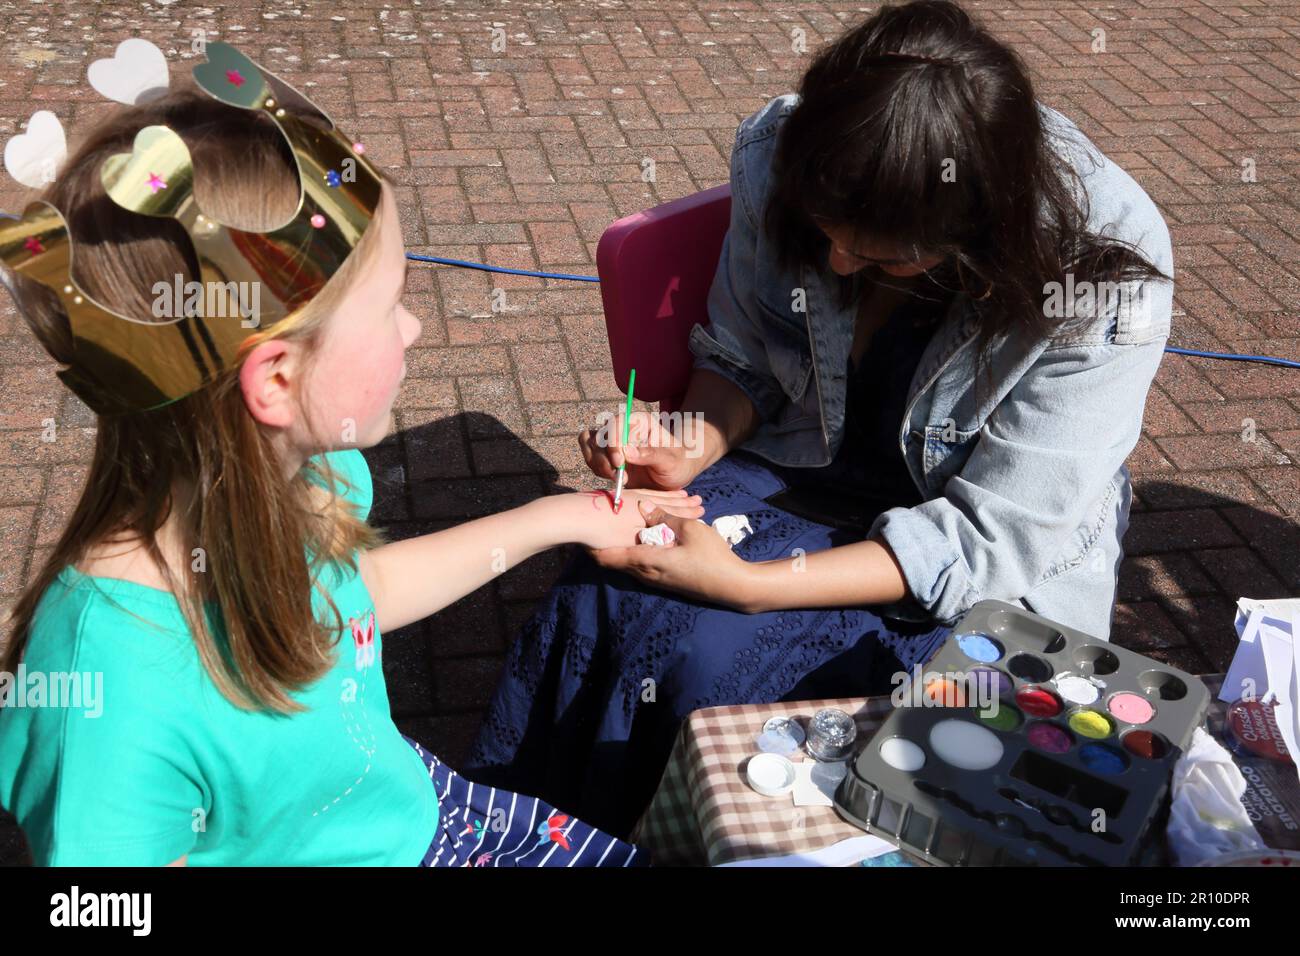 Young Girl Wearing Paper Crown with Woman Painting on her hand with Face Paints at Street Party Celebrating King Charles III Coronation Surrey England Stock Photo